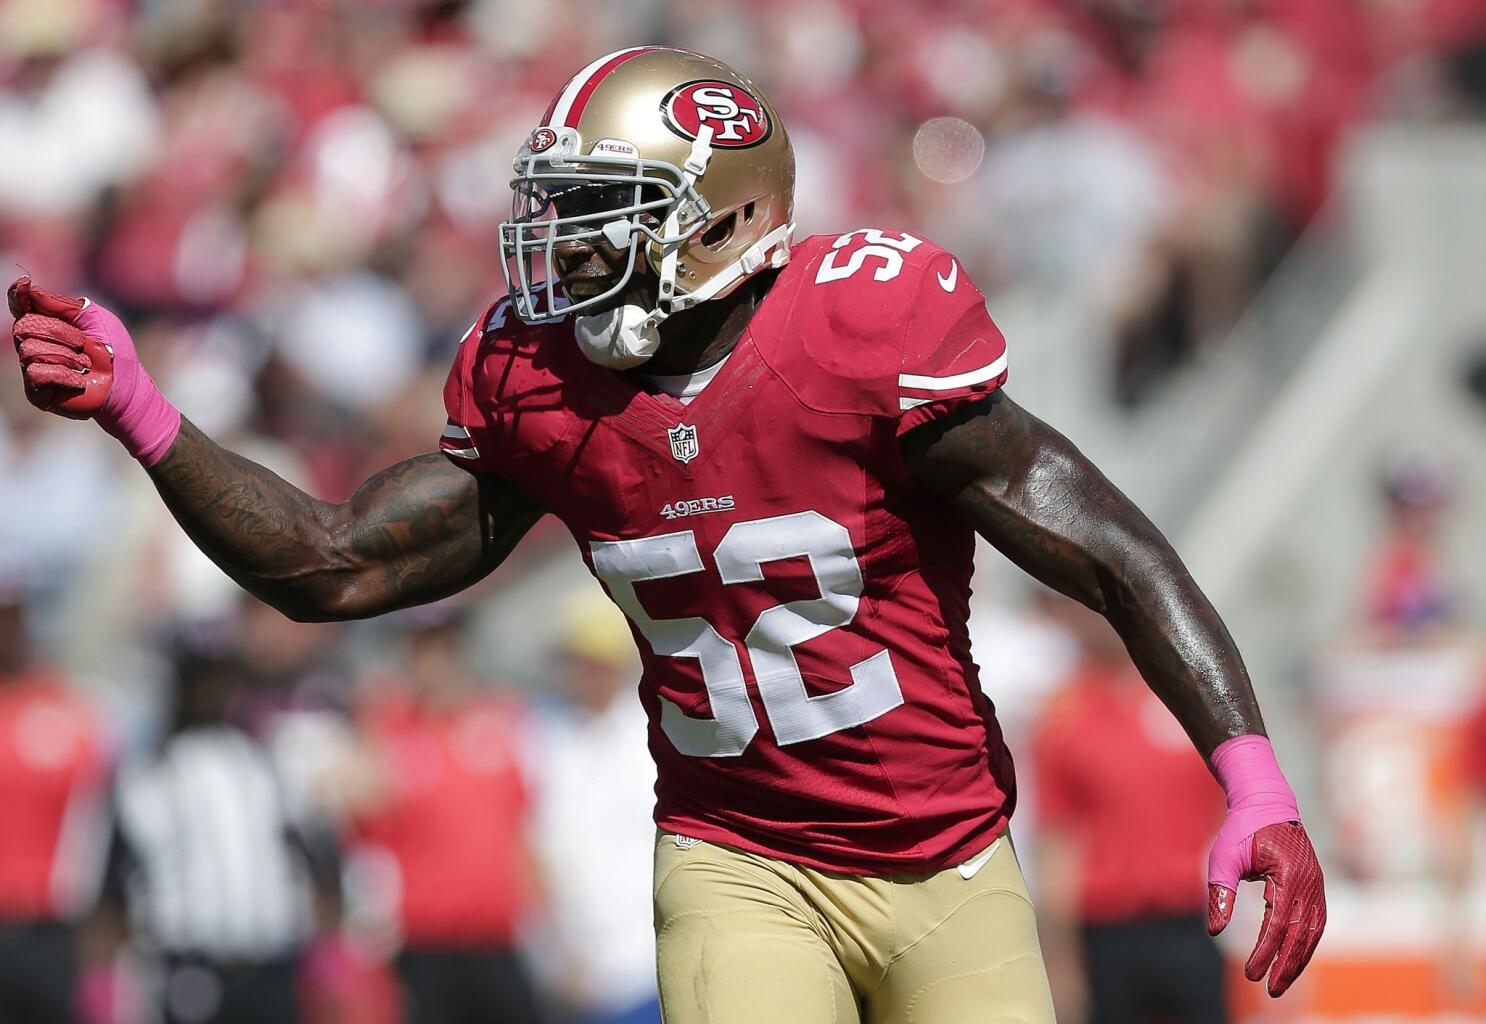 49ers linebacker Patrick Willis faces surgery, is out for season 